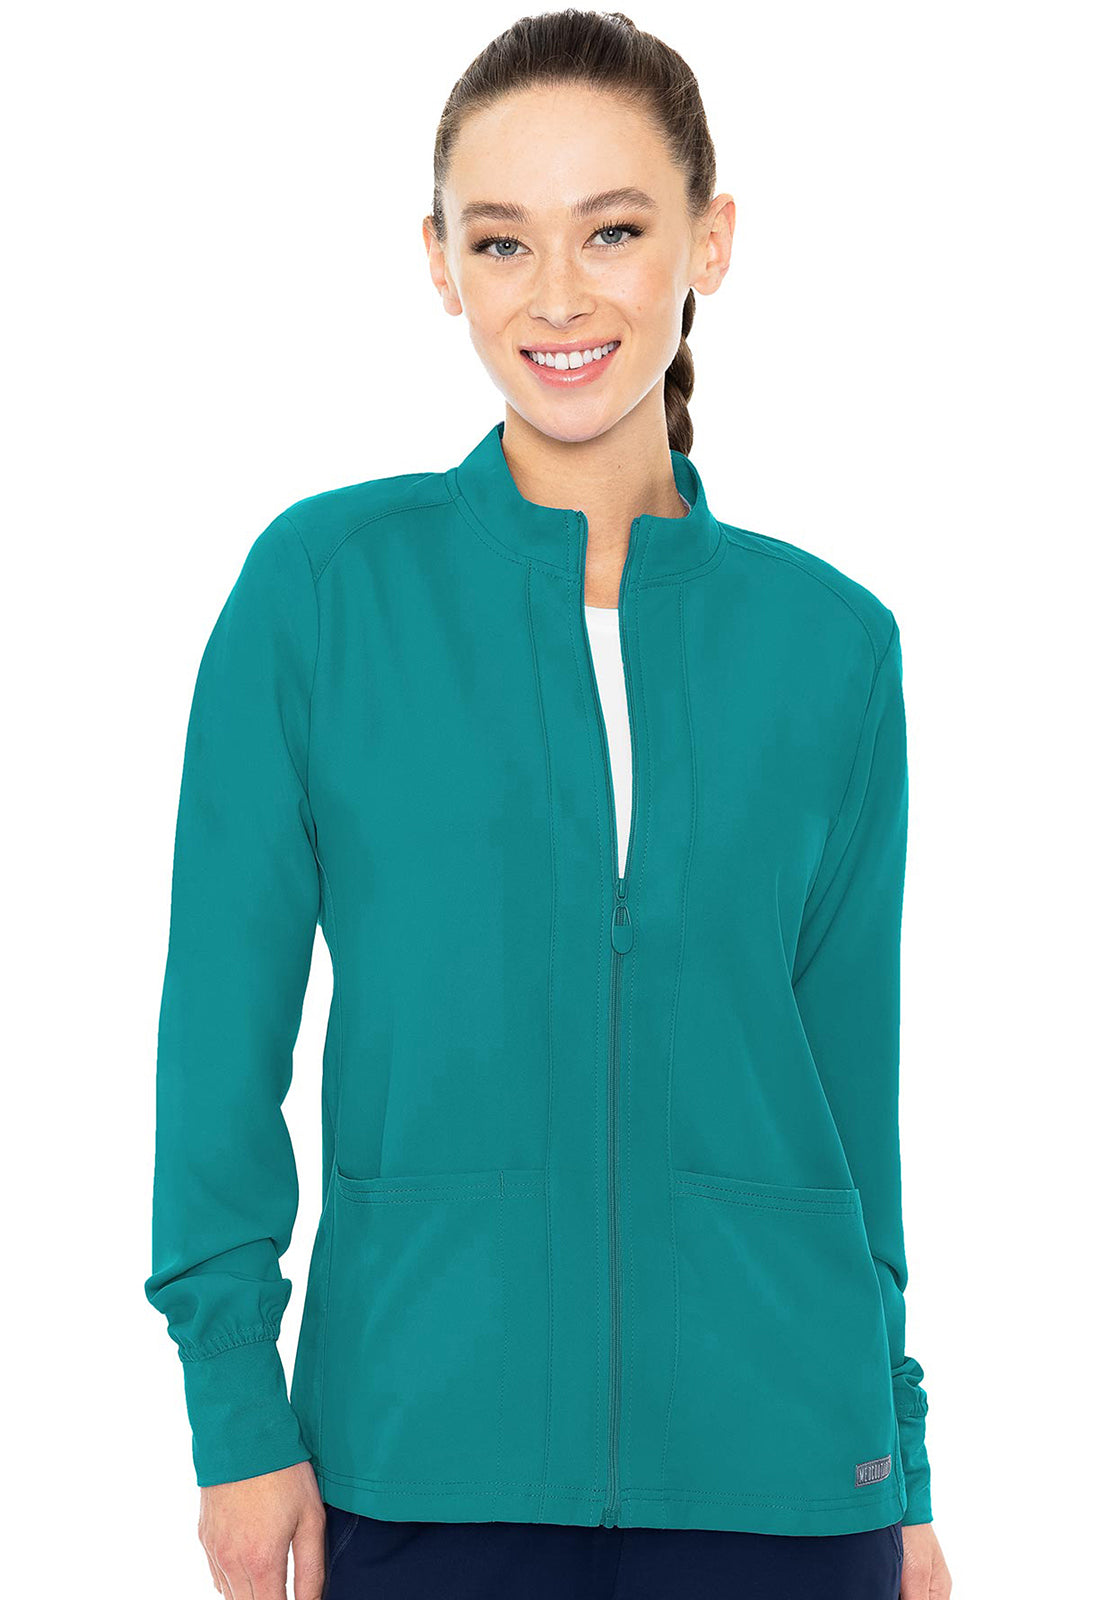 Med Couture Insight Zip Front Warm-Up With Shoulder Yokes Jacket